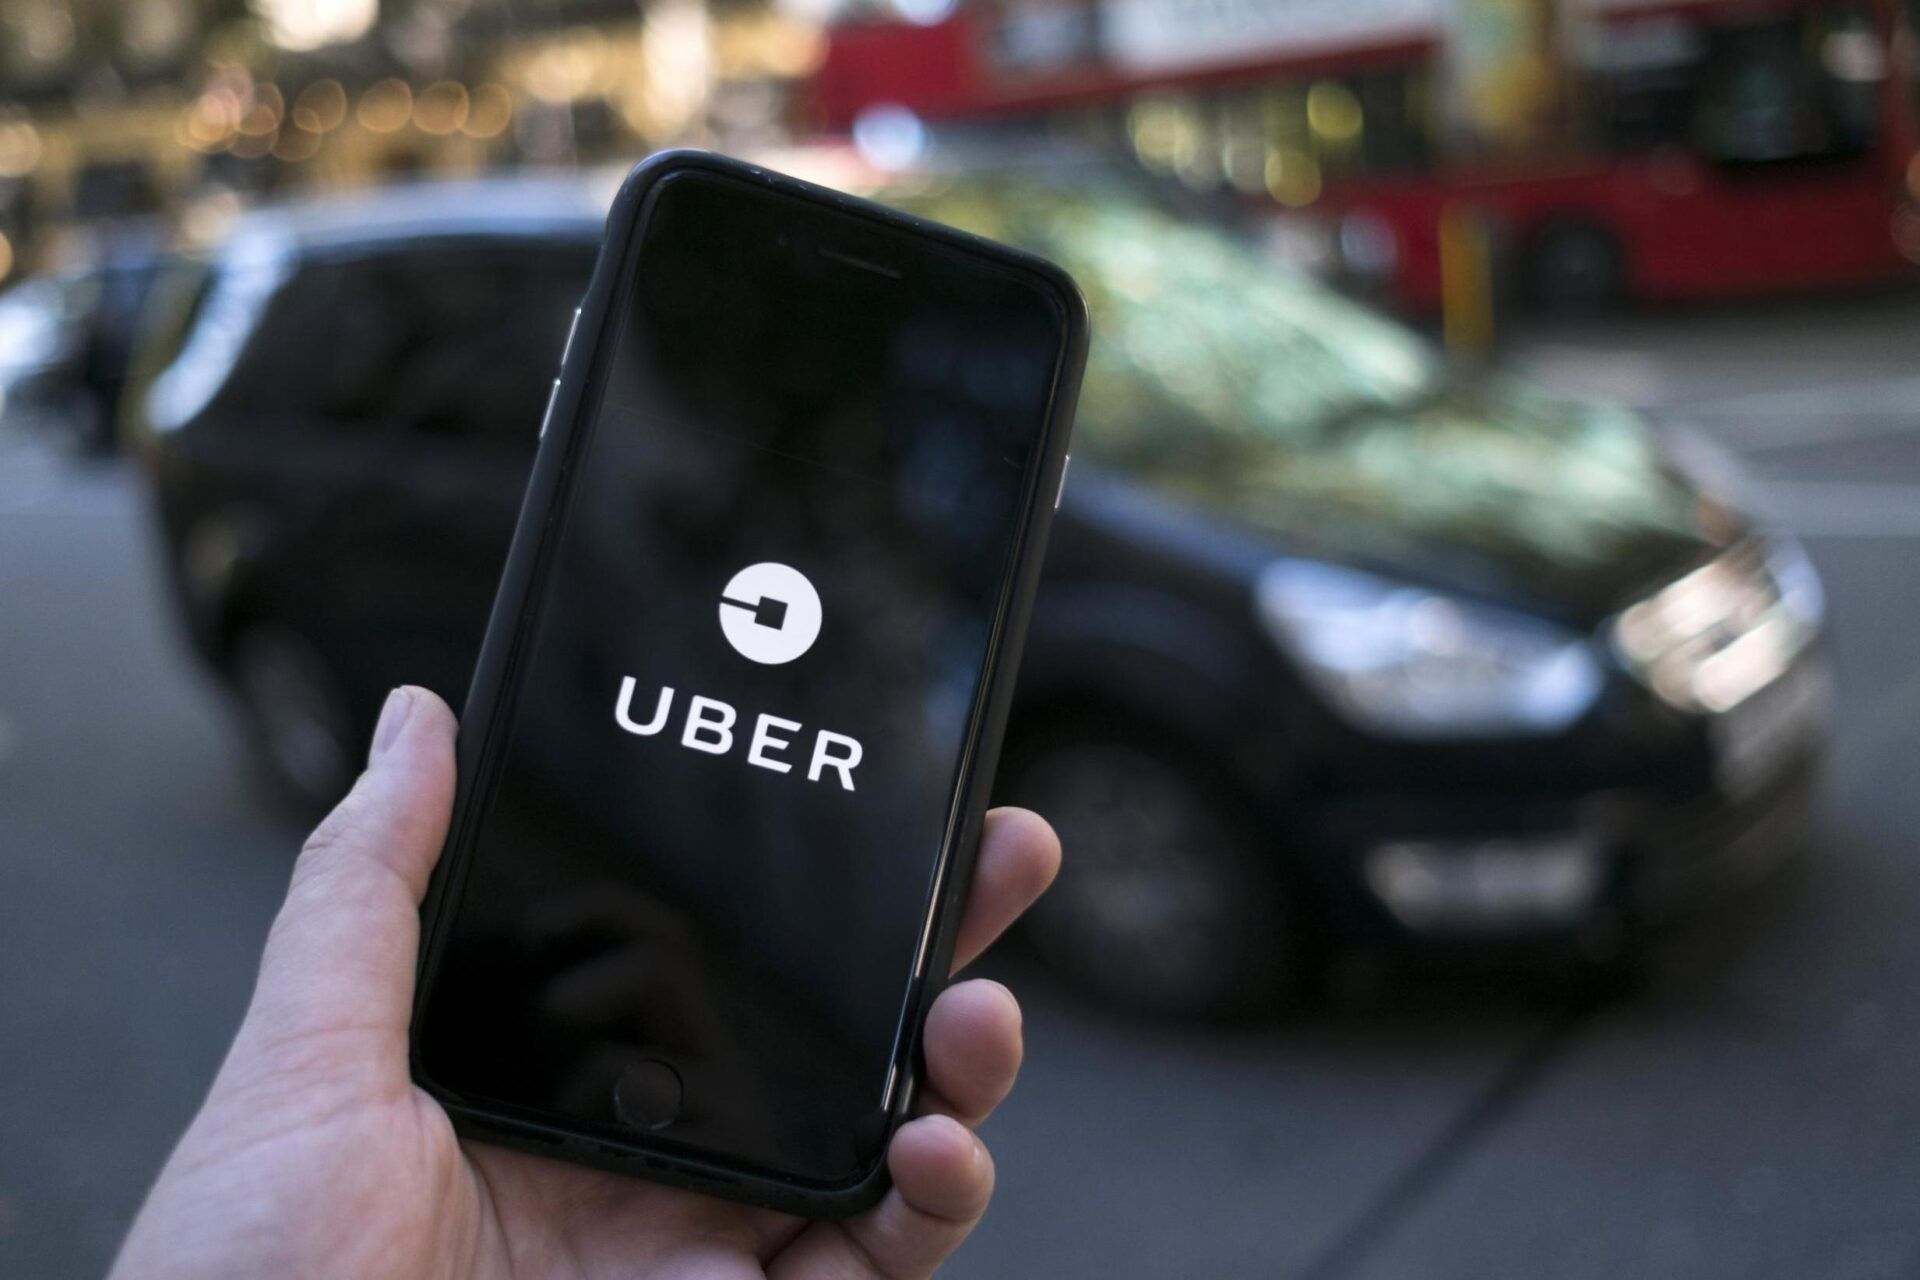 Uber, Bolt among other ride-hailing companies face strict regulations in Kenya